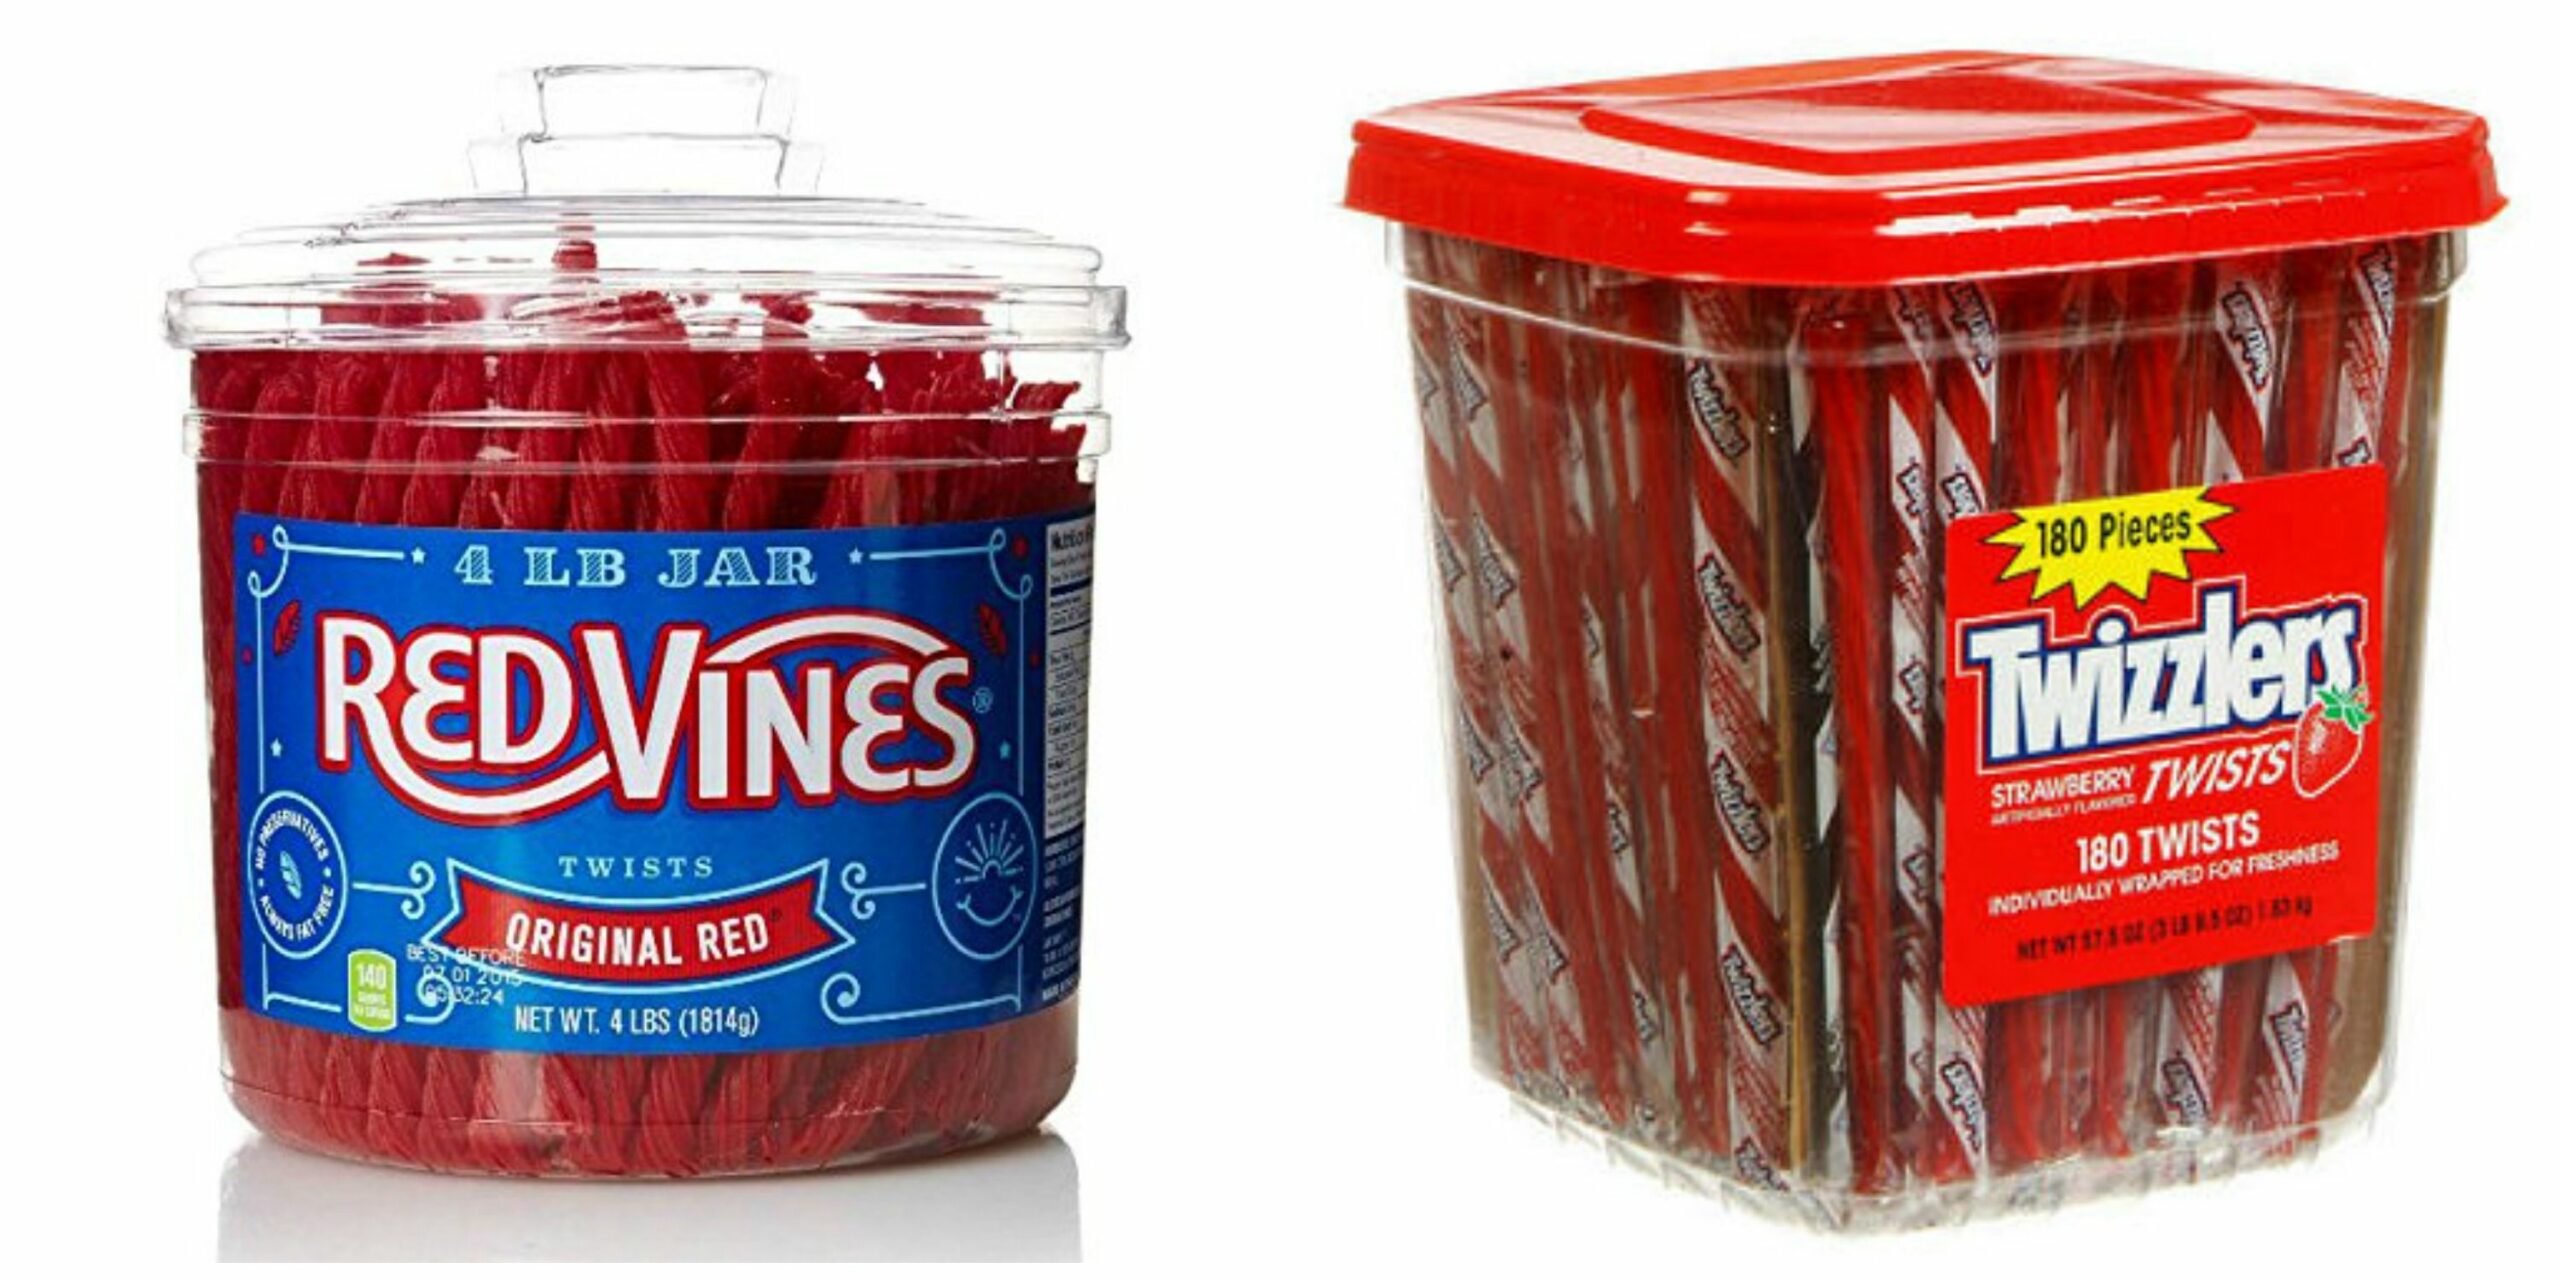 Do Red Vines cause gas?